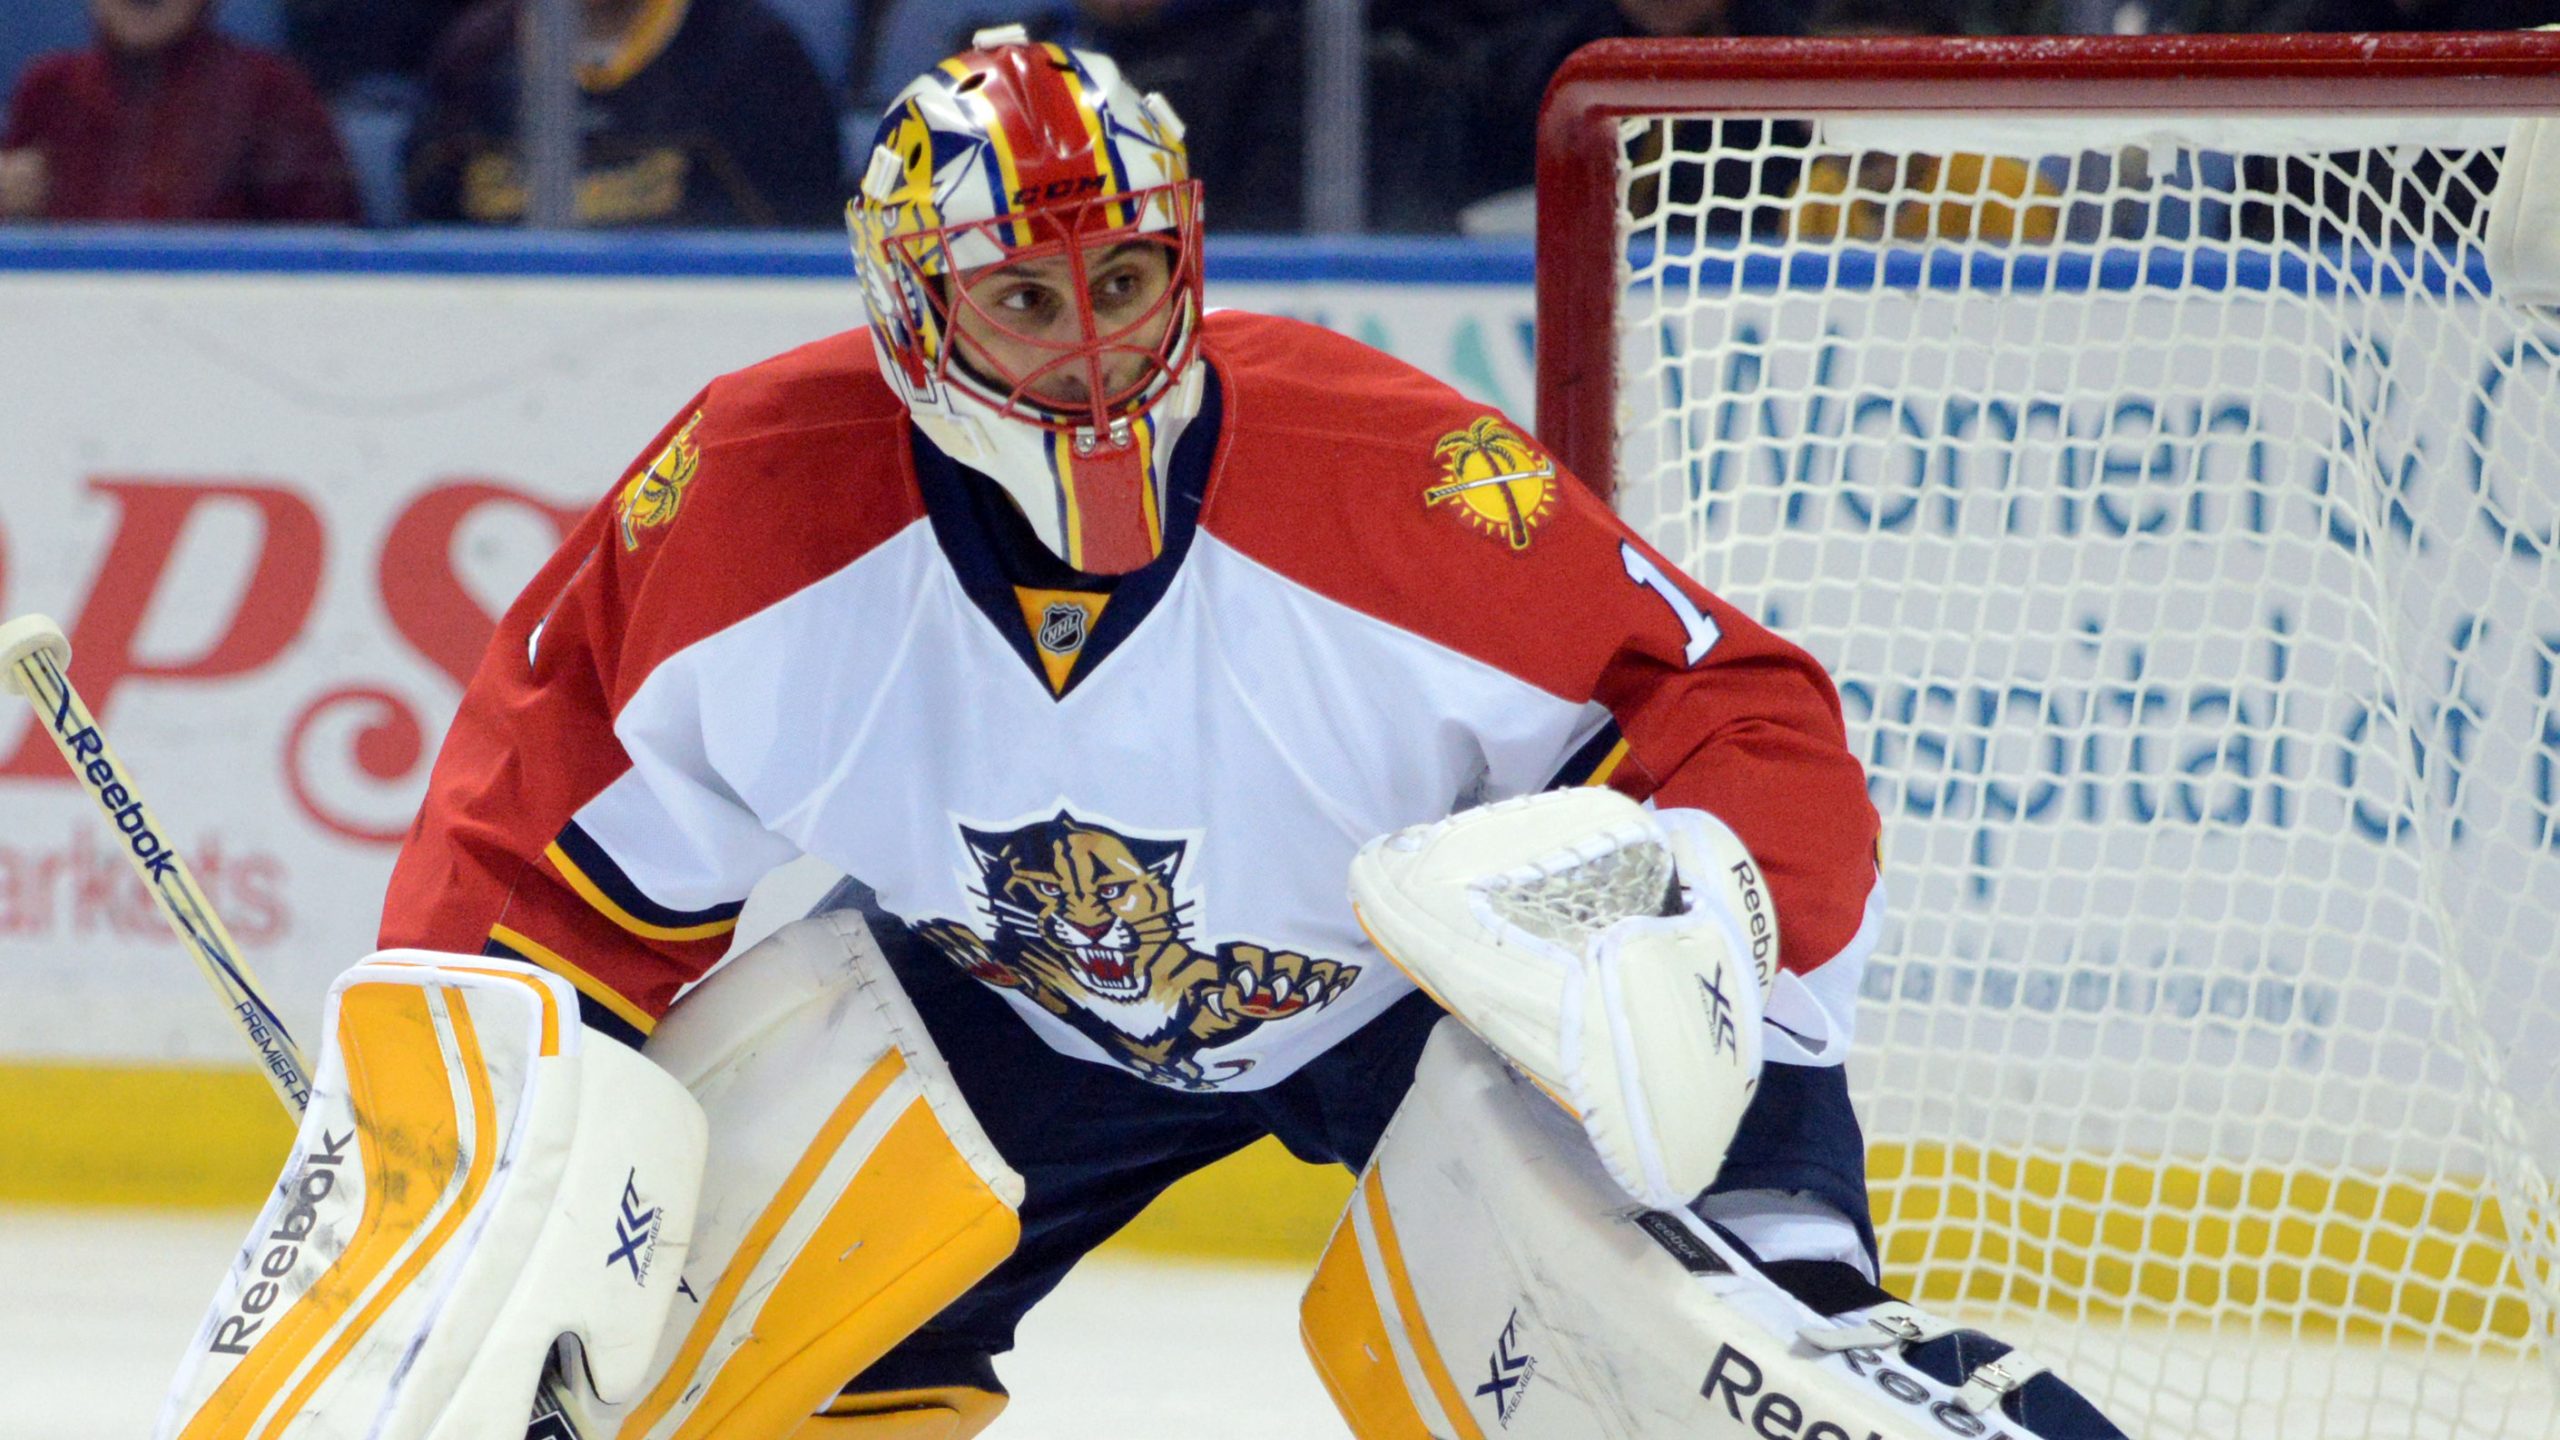 Canucks fans not happy with Hall of Fame's Luongo photo choice